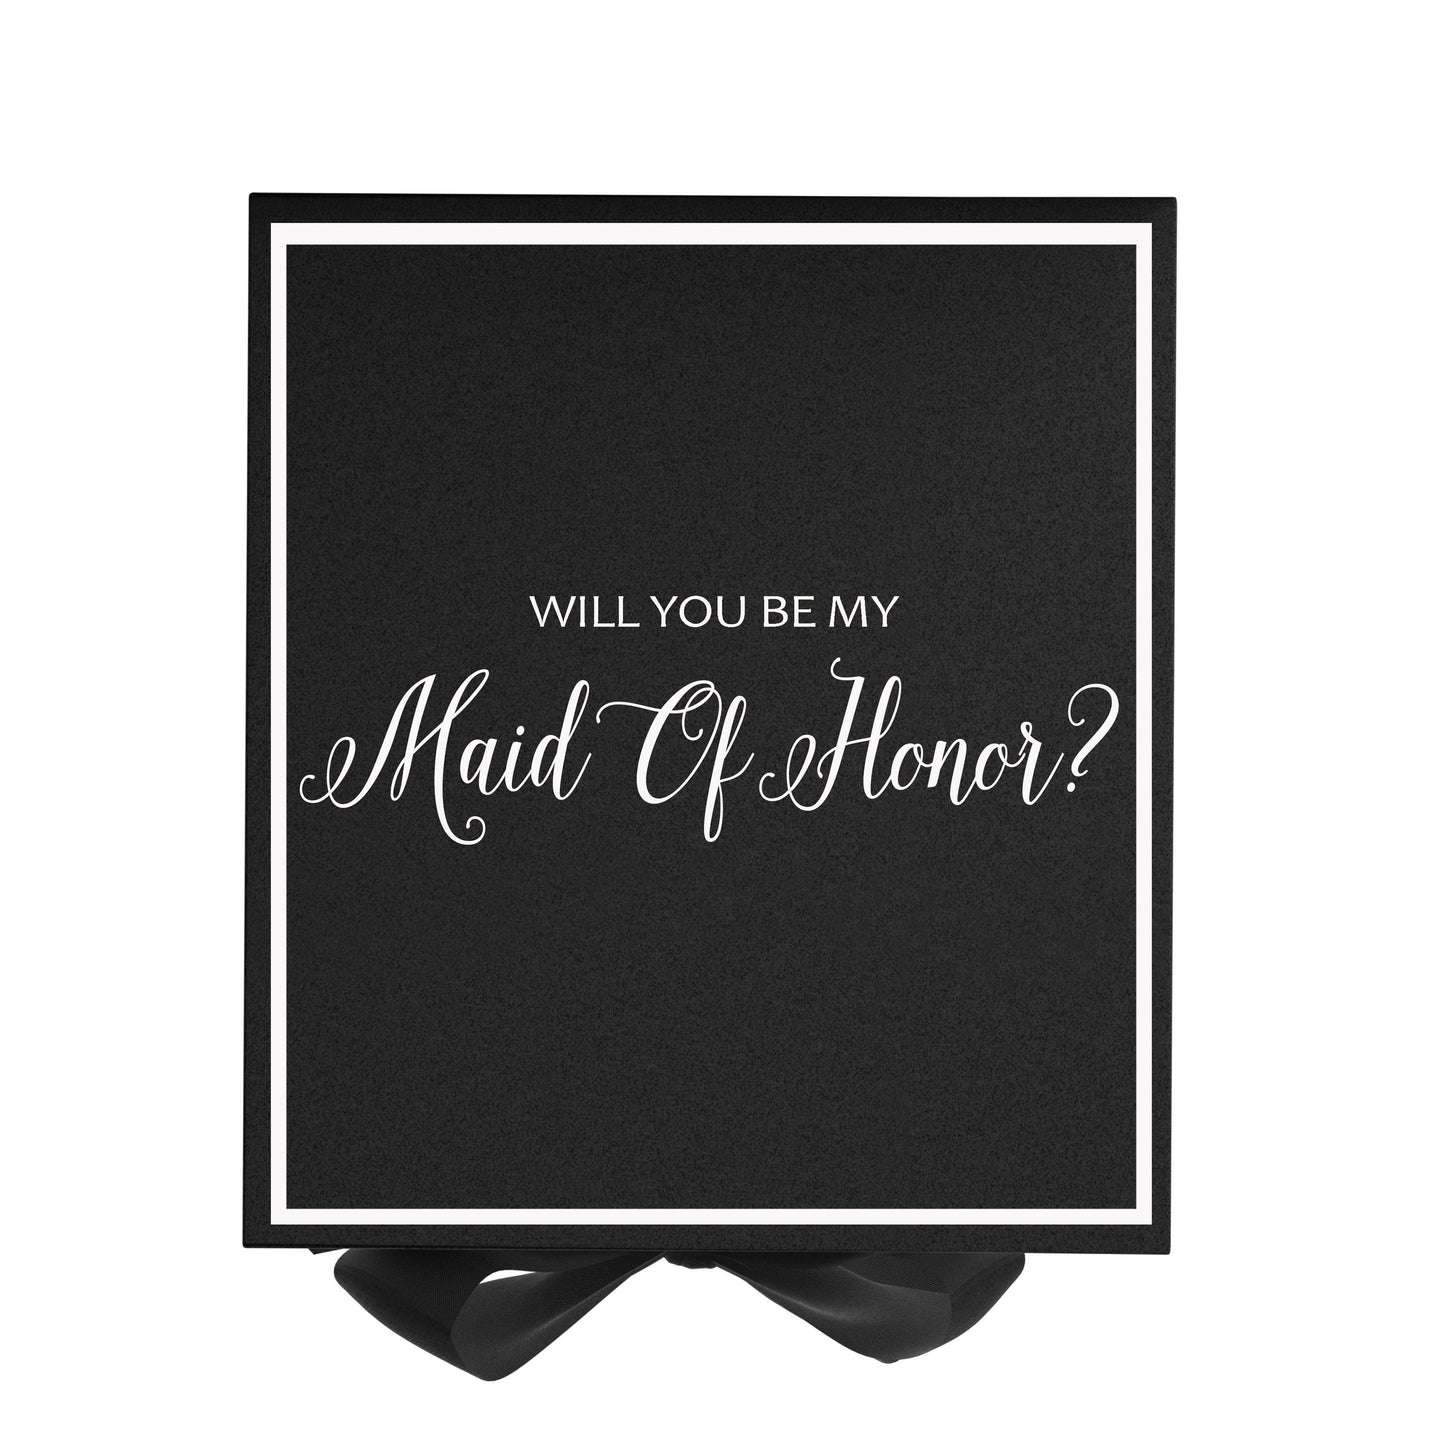 Will You Be My maid of honor? Proposal Box black -  Border